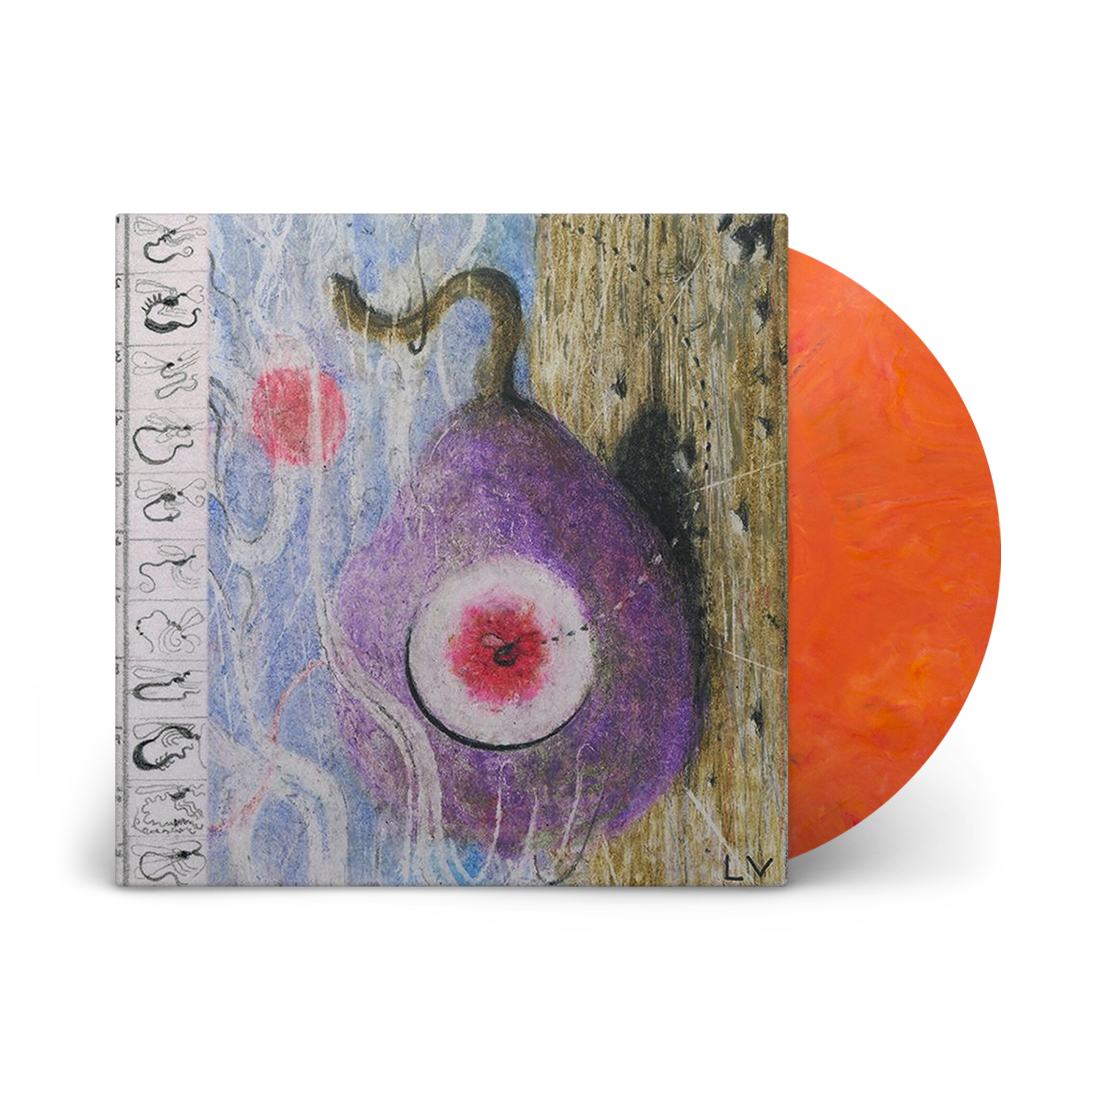 Lunar Vacation - Inside Every Fig Is A Dead Wasp: Exclusive Tangerine Dream Vinyl LP + Signed Art Print